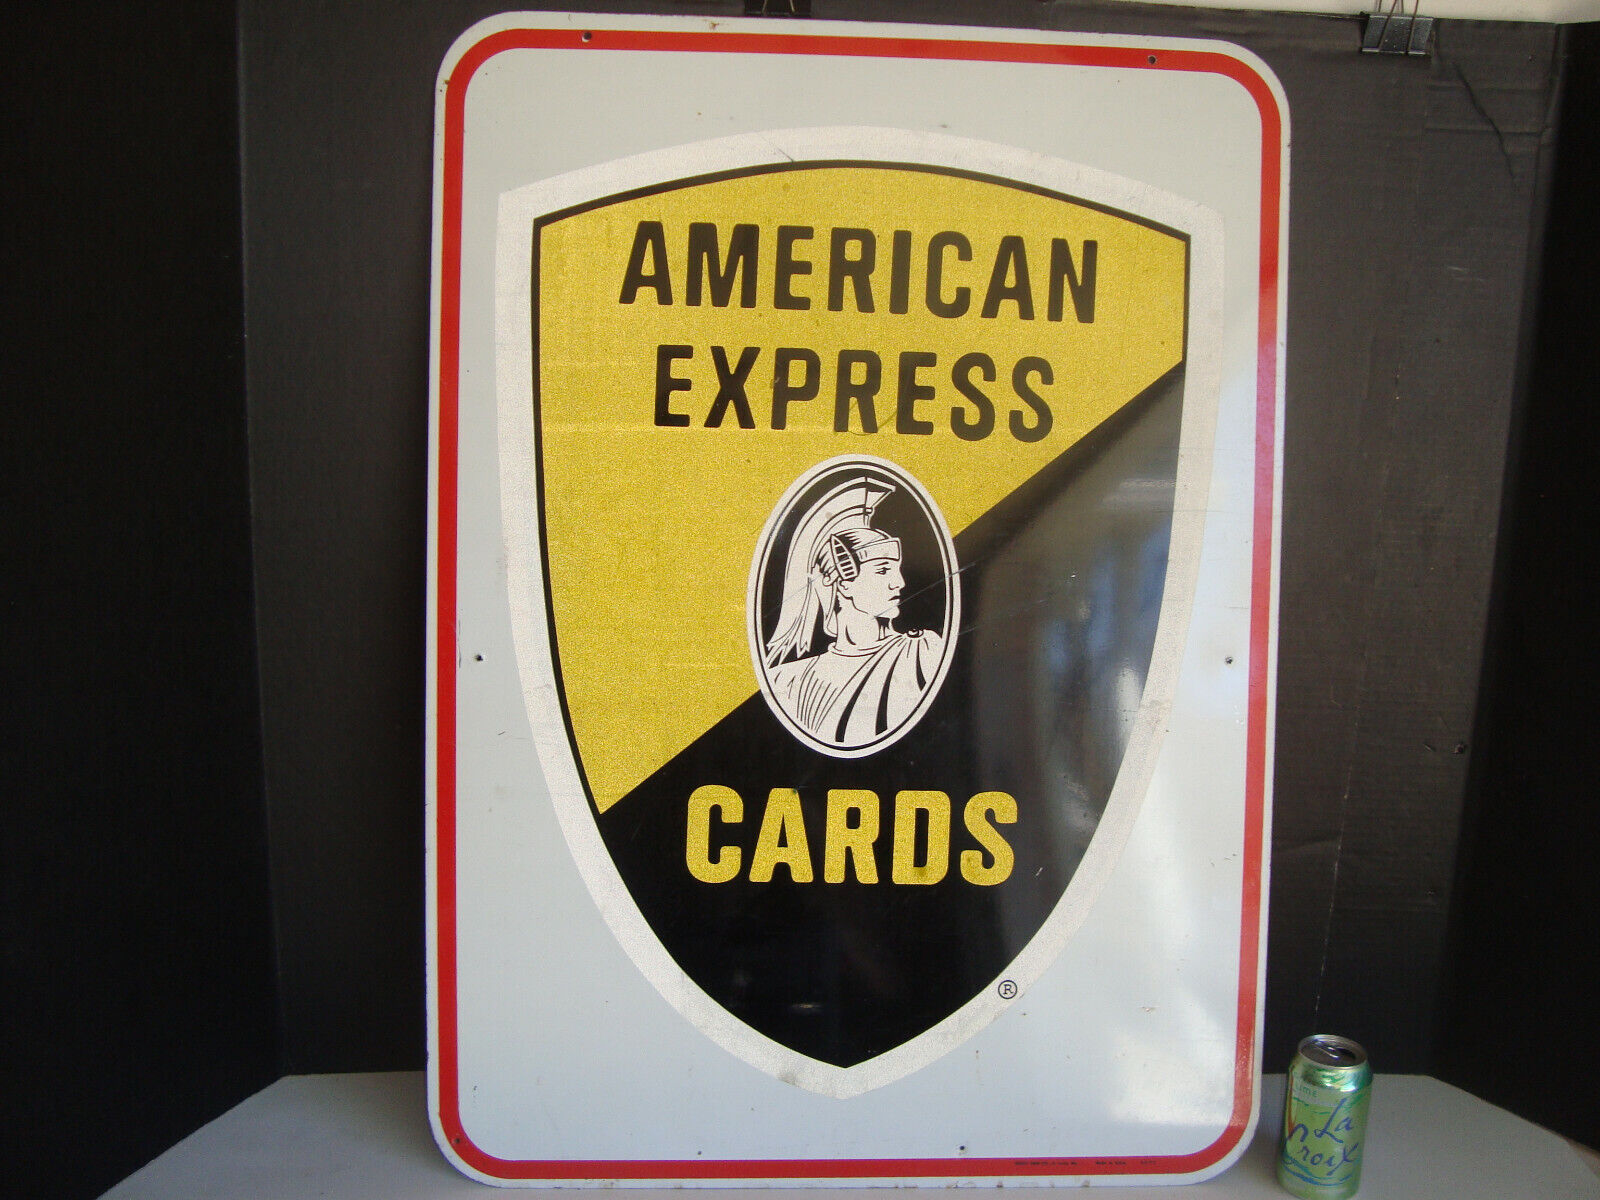 Vtg Big Heavy 26x36 AMERICAN EXPRESS CARDS DOUBLE SIDED METAL ADVERTISING SIGN 